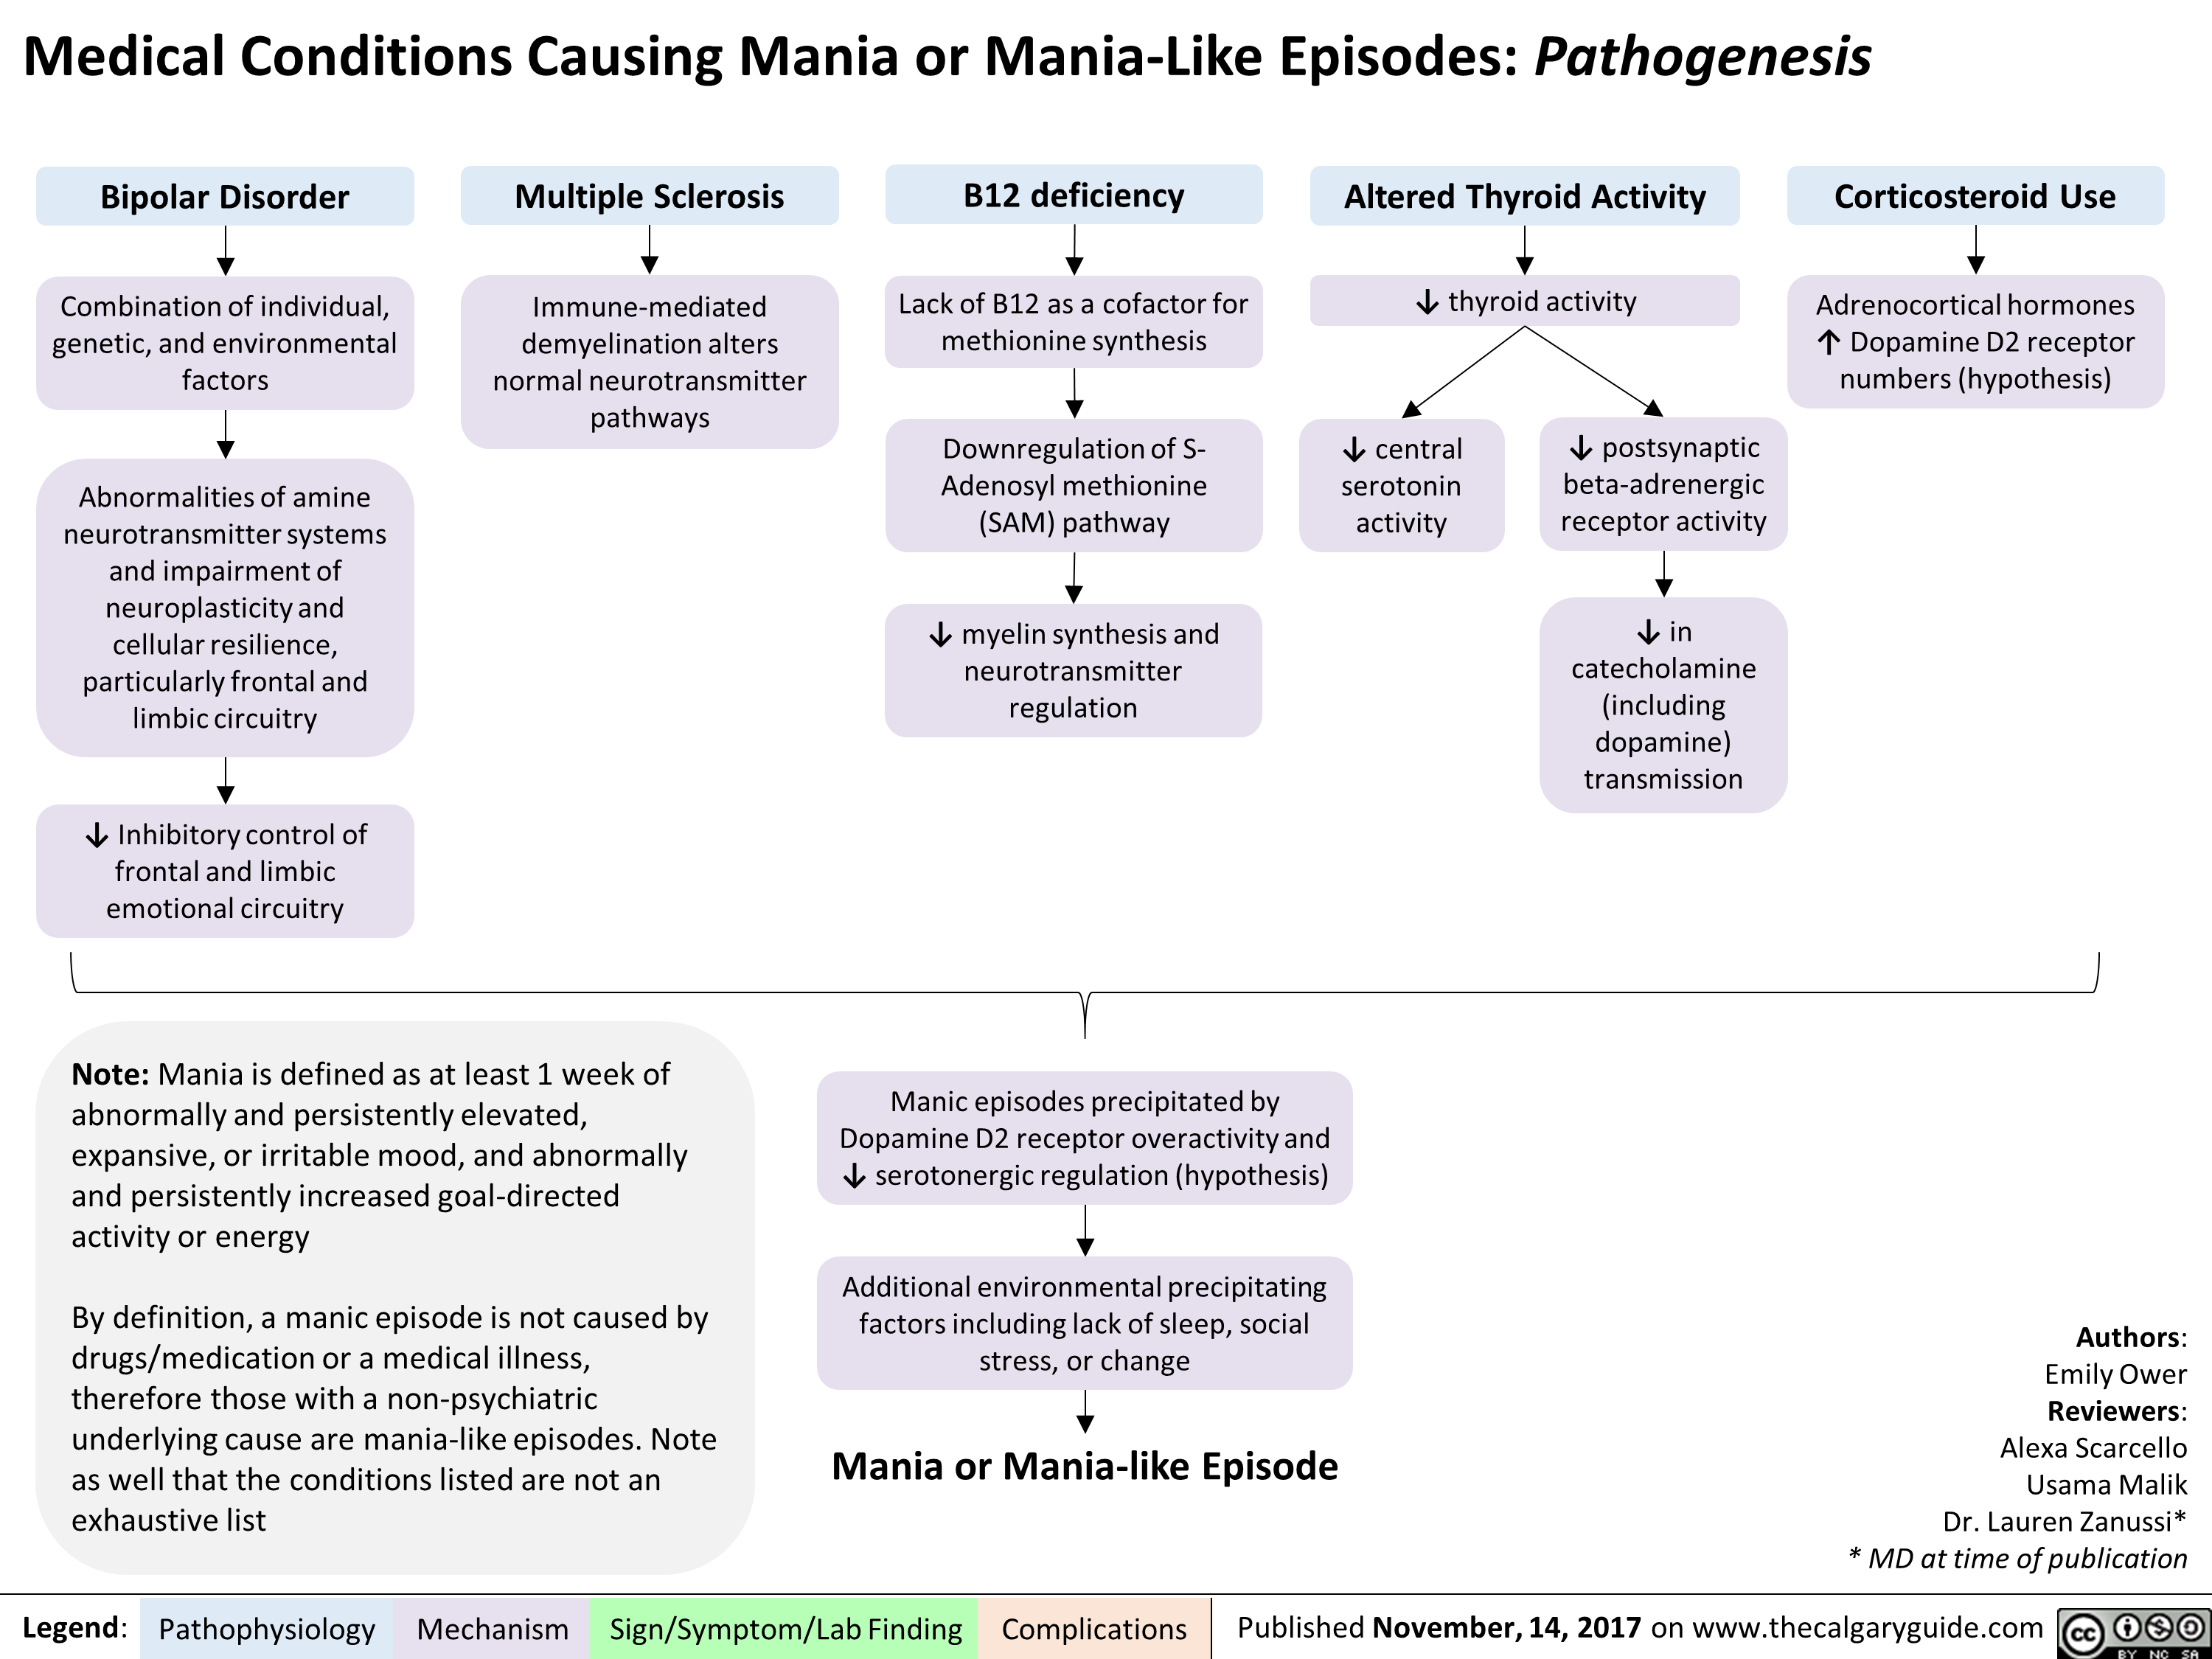 Medical Conditions Causing Mania or Mania-Like Episodes: Pathogenesis 
Bipolar Disorder Combination of individual, genetic, and environmental factors 
Abnormalities of amine neurotransmitter systems and impairment of neuroplasticity and cellular resilience, particularly frontal and limbic circuitry 
4, Inhibitory control of frontal and limbic emotional circuitry 
Multiple Sclerosis Immune-mediated demyelination alters normal neurotransmitter pathways 
B12 deficiency Lack of B12 as a cofactor for methionine synthesis 
Downregulation of S-Adenosyl methionine (SAM) pathway 
4, myelin synthesis and neurotransmitter regulation 
Altered Thyroid Activity Corticosteroid Use 7), 
4, thyroid activity 
4, central serotonin activity 
4, postsynaptic beta-adrenergic receptor activity 4, in catecholamine (including dopamine) transmission 
Adrenocortical hormones t Dopamine D2 receptor numbers (hypothesis) 
Note: Mania is defined as at least 1 week of abnormally and persistently elevated, expansive, or irritable mood, and abnormally and persistently increased goal-directed activity or energy 
By definition, a manic episode is not caused by drugs/medication or a medical illness, therefore those with a non-psychiatric underlying cause are mania-like episodes. Note as well that the conditions listed are not an exhaustive list 
Legend: 
Pathophysiology Mechanism 
Manic episodes precipitated by Dopamine D2 receptor overactivity and 4, serotonergic regulation (hypothesis) 
Additional environmental precipitating factors including lack of sleep, social stress, or change Mania or Mania-like Episode 
Sign/Symptom/Lab Finding 
Complications 
Authors: Emily Ower Reviewers: Alexa Scarcello Usama Malik Dr. Lauren Zanussi* * MD at time of publication 